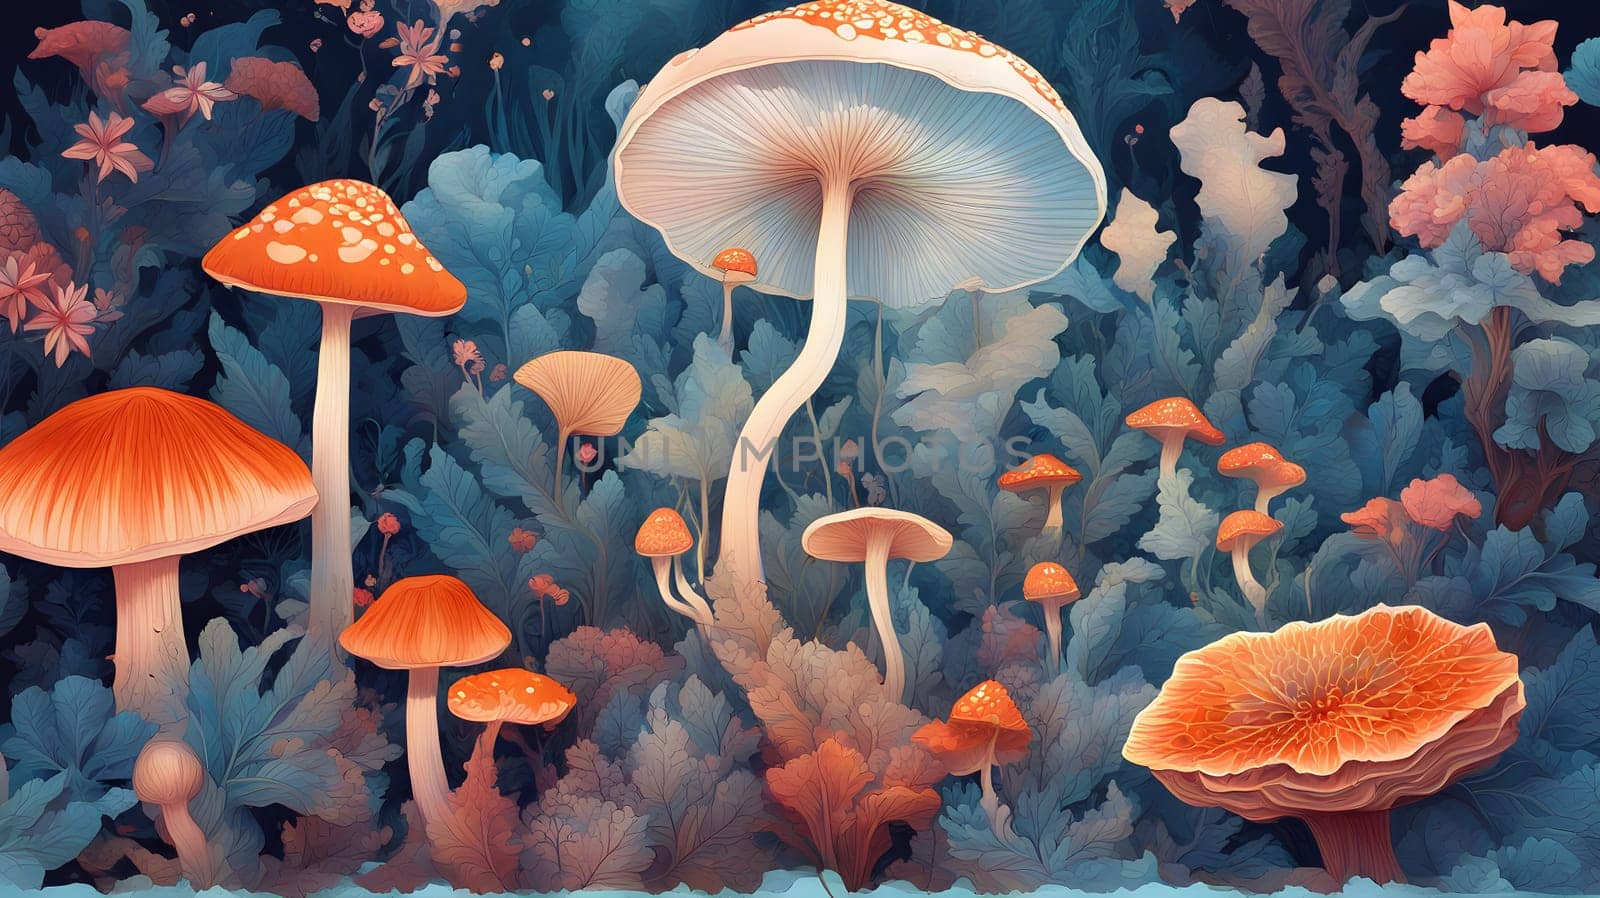 Enchanted Forest Mushrooms Illustration Created by artificial intelligence